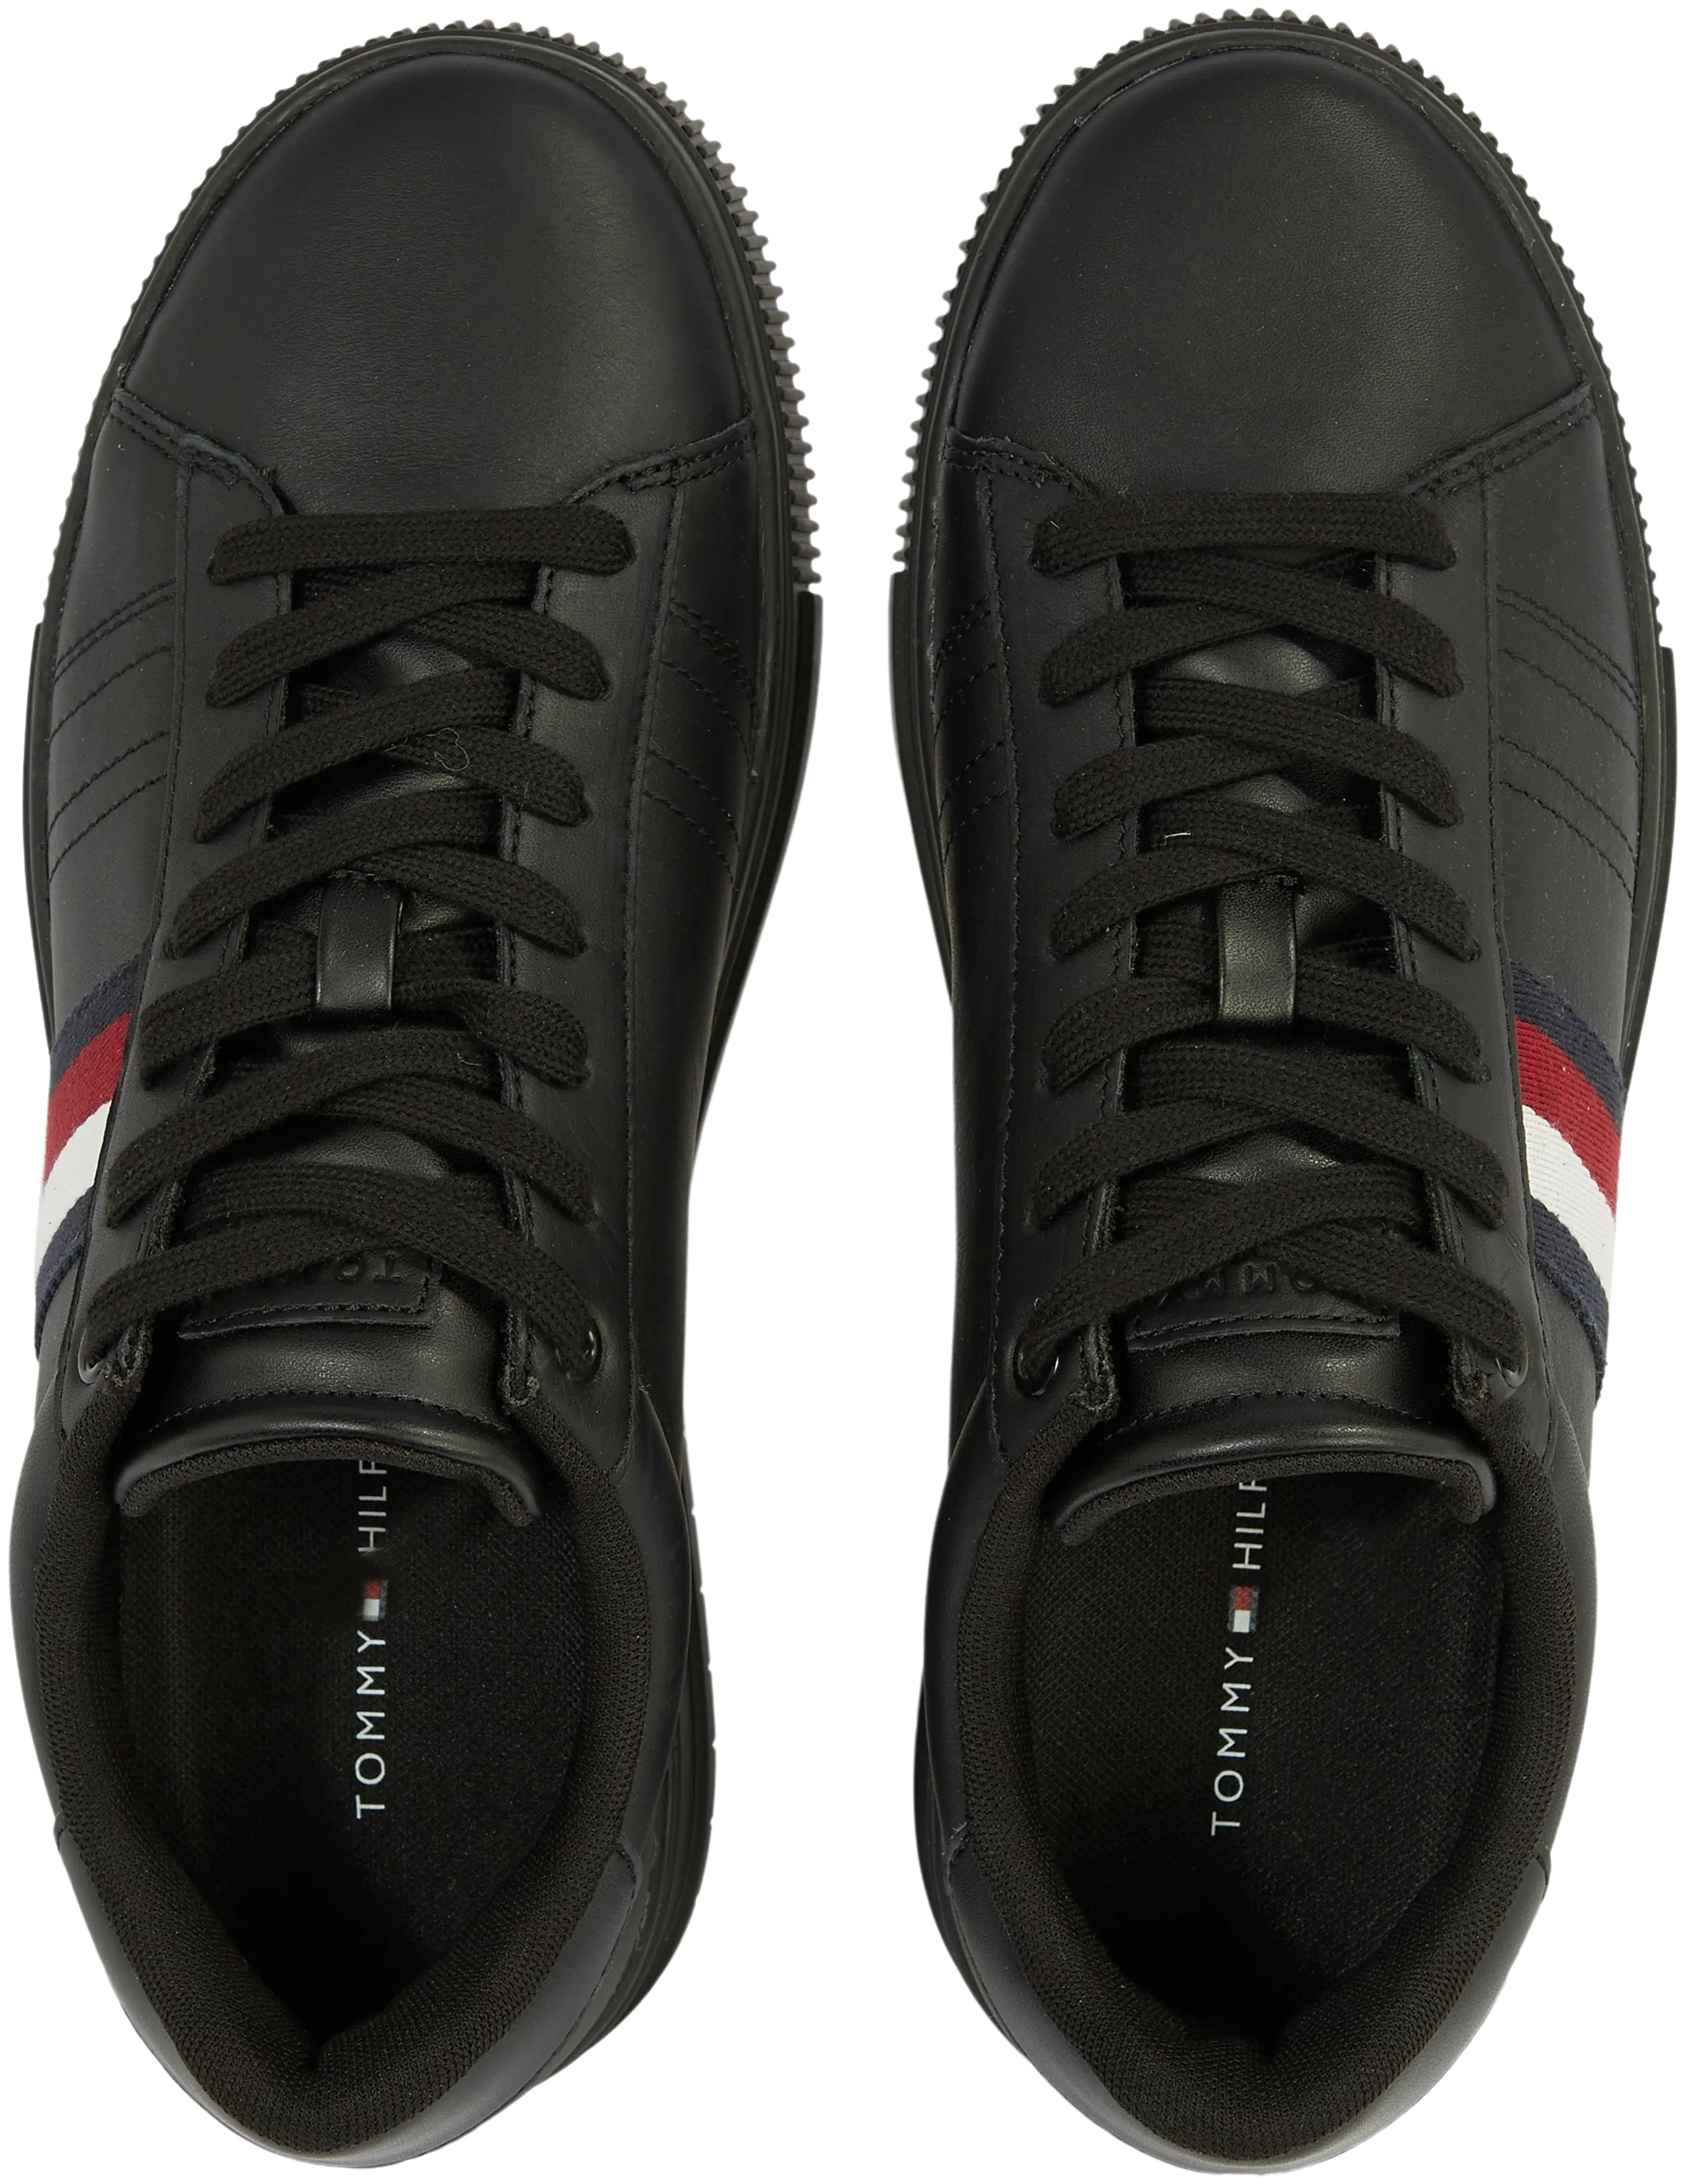 Tommy Hilfiger Supercup leather tennarit